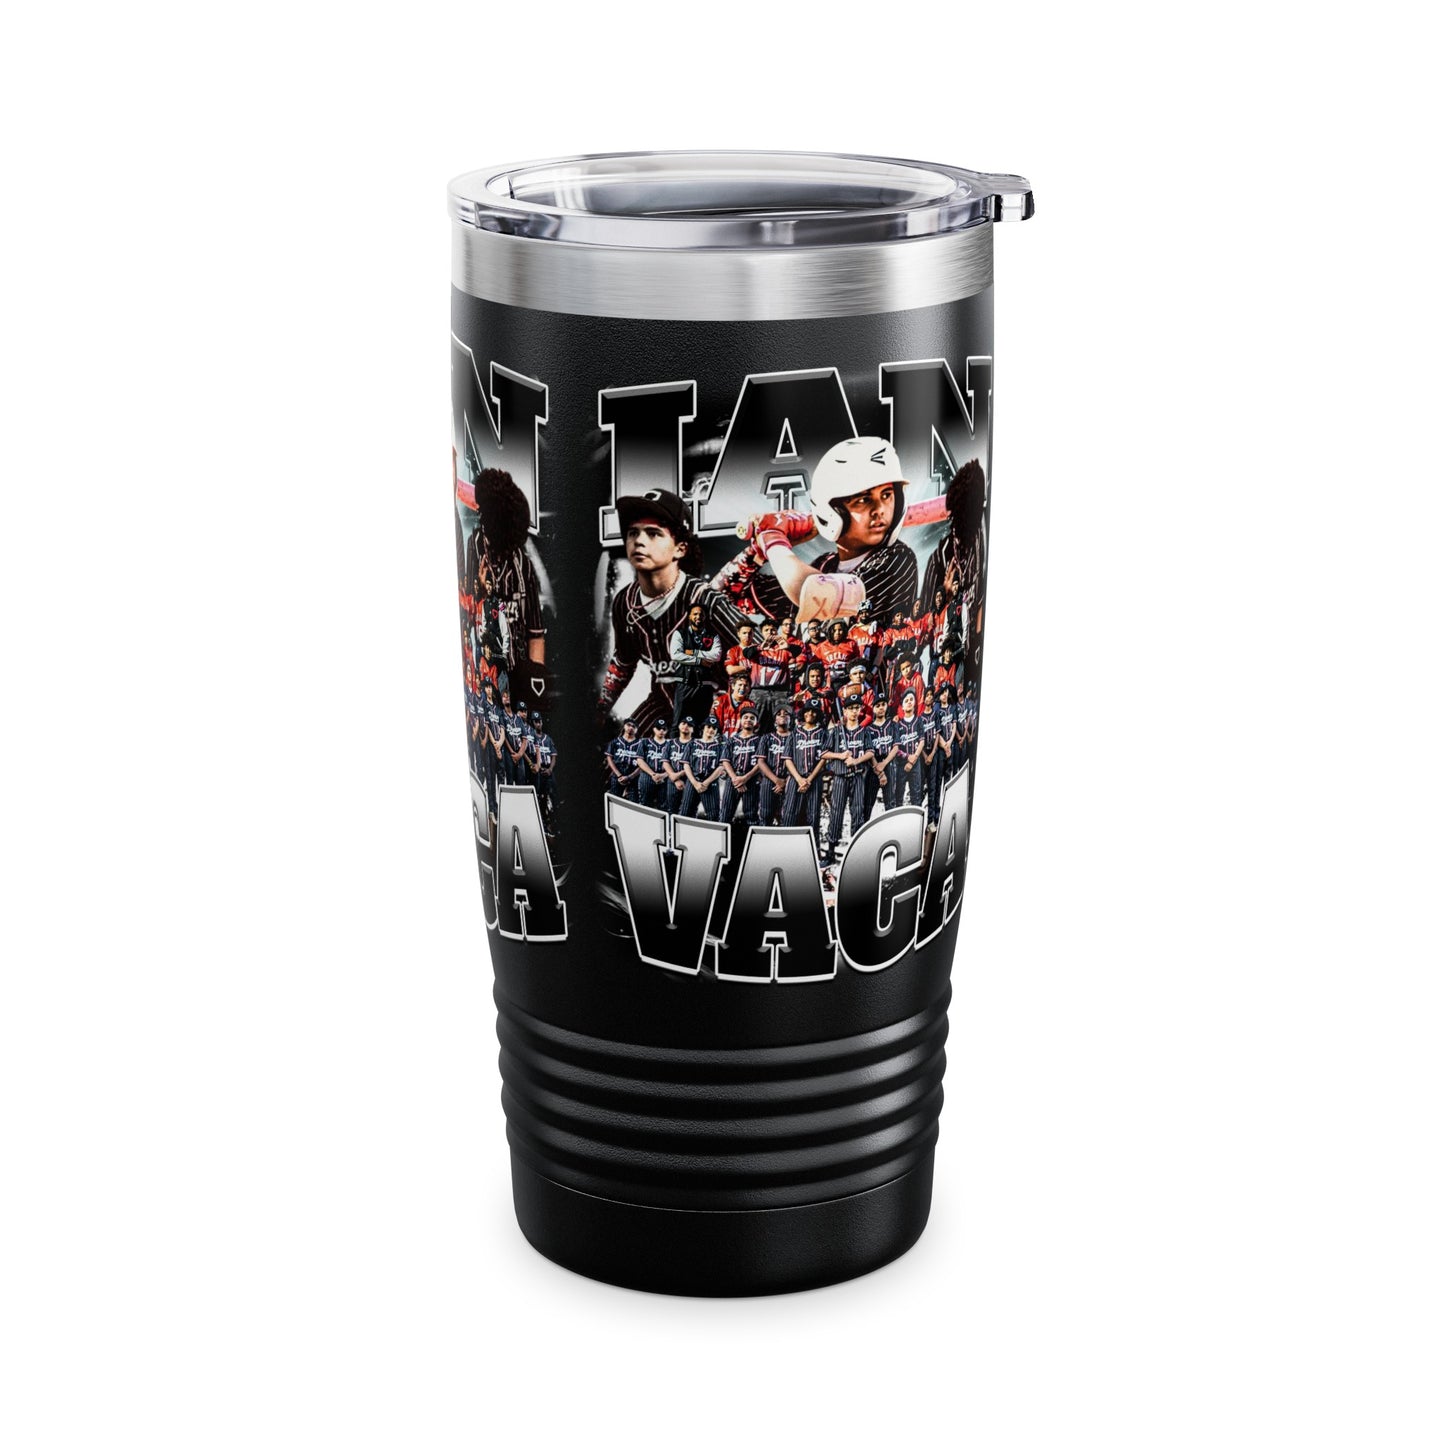 Ian Vaca Stainless Steal Tumbler